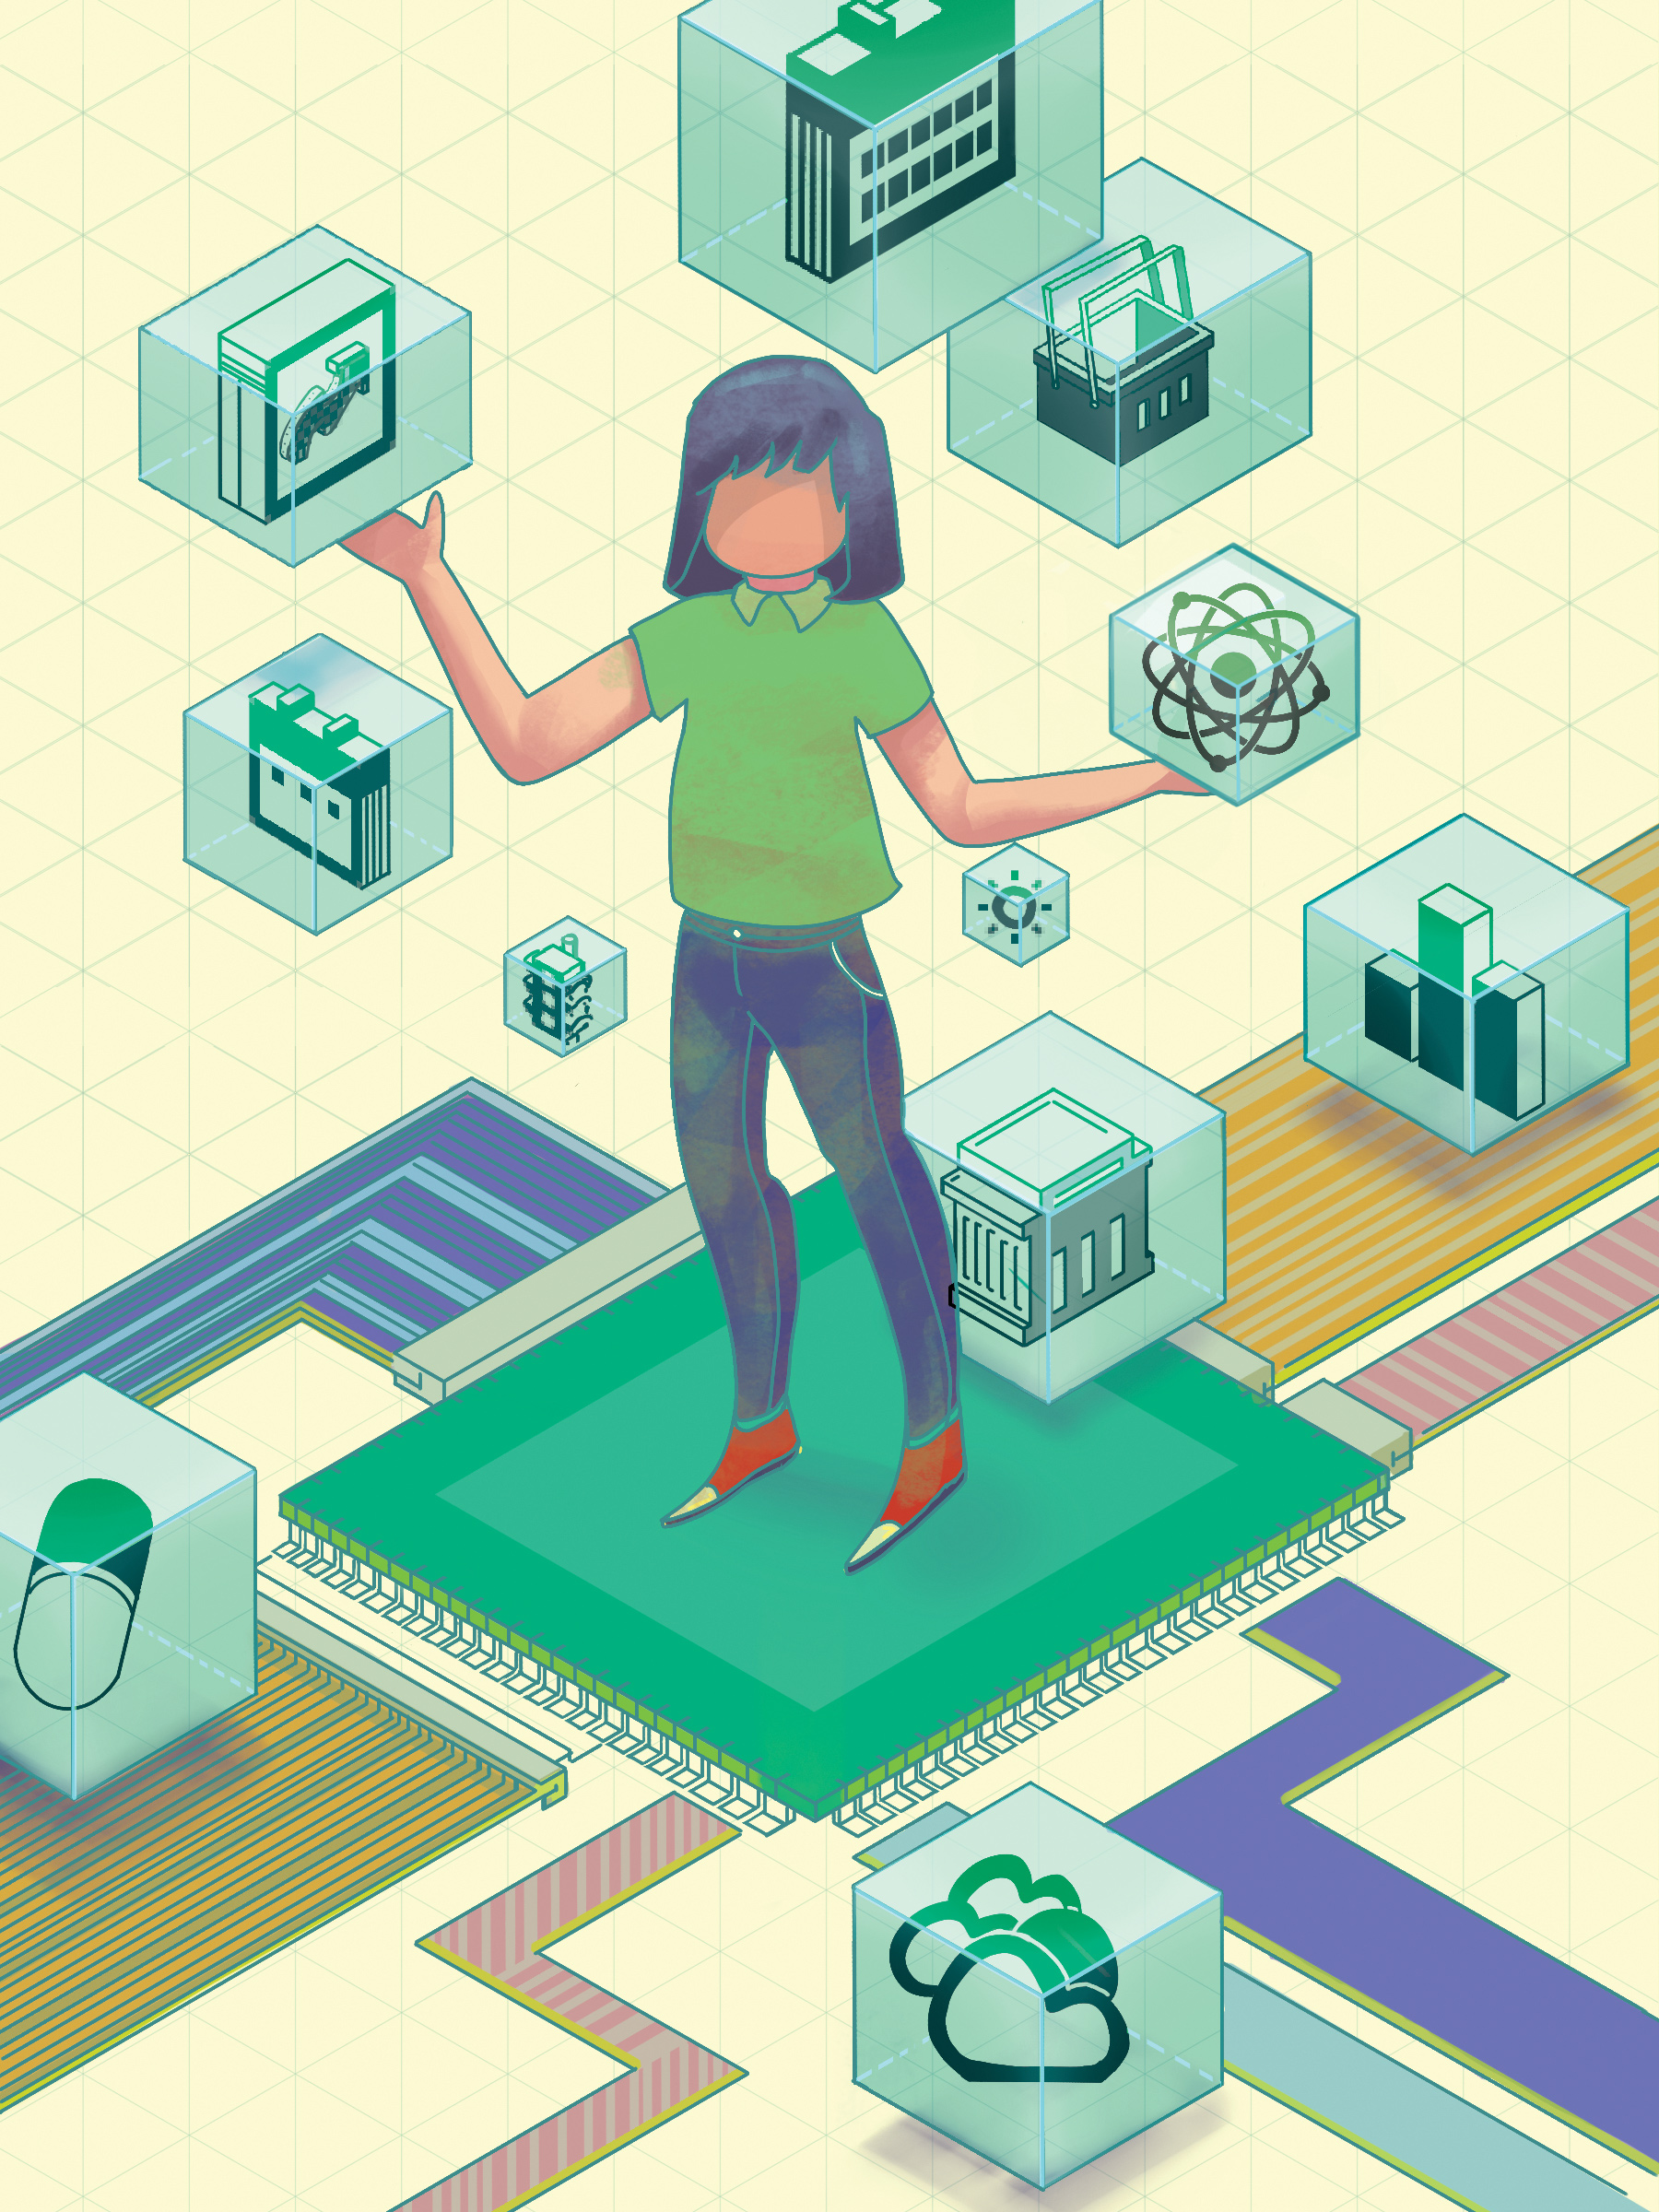 A colorful illustration of a cartoon woman standing on a computer chip against a background of pale yellow graph paper. Clear cubes are floating all around her, and each one contains an icon such as an atom, mail, a bar chart, a bank, a pill and a calendar.